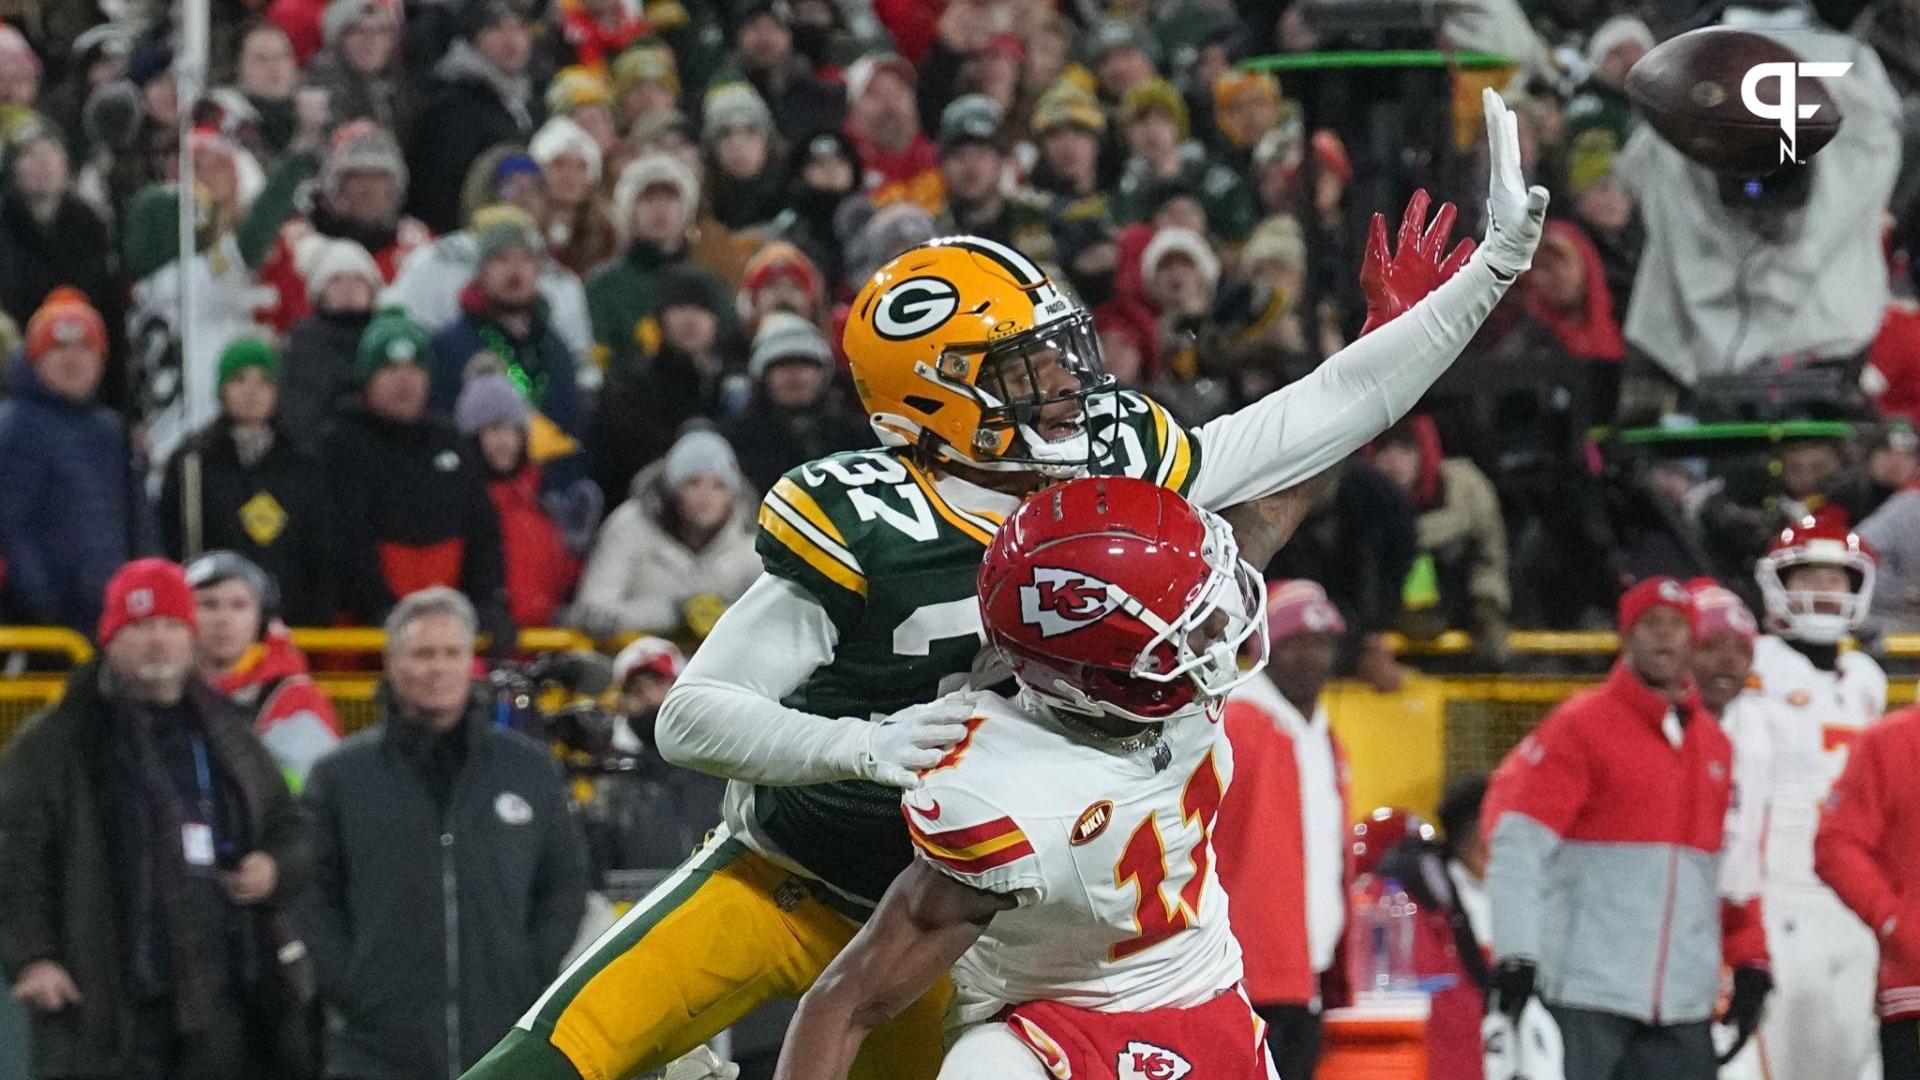 Green Bay Packers cornerback Carrington Valentine (37) bats a way a pass intended for Kansas City Chiefs wide receiver Marquez Valdes-Scantling (11) during the fourth quarter of their game Sunday, December 3, 2023 at Lambeau Field in Green Bay, Wisconsin.